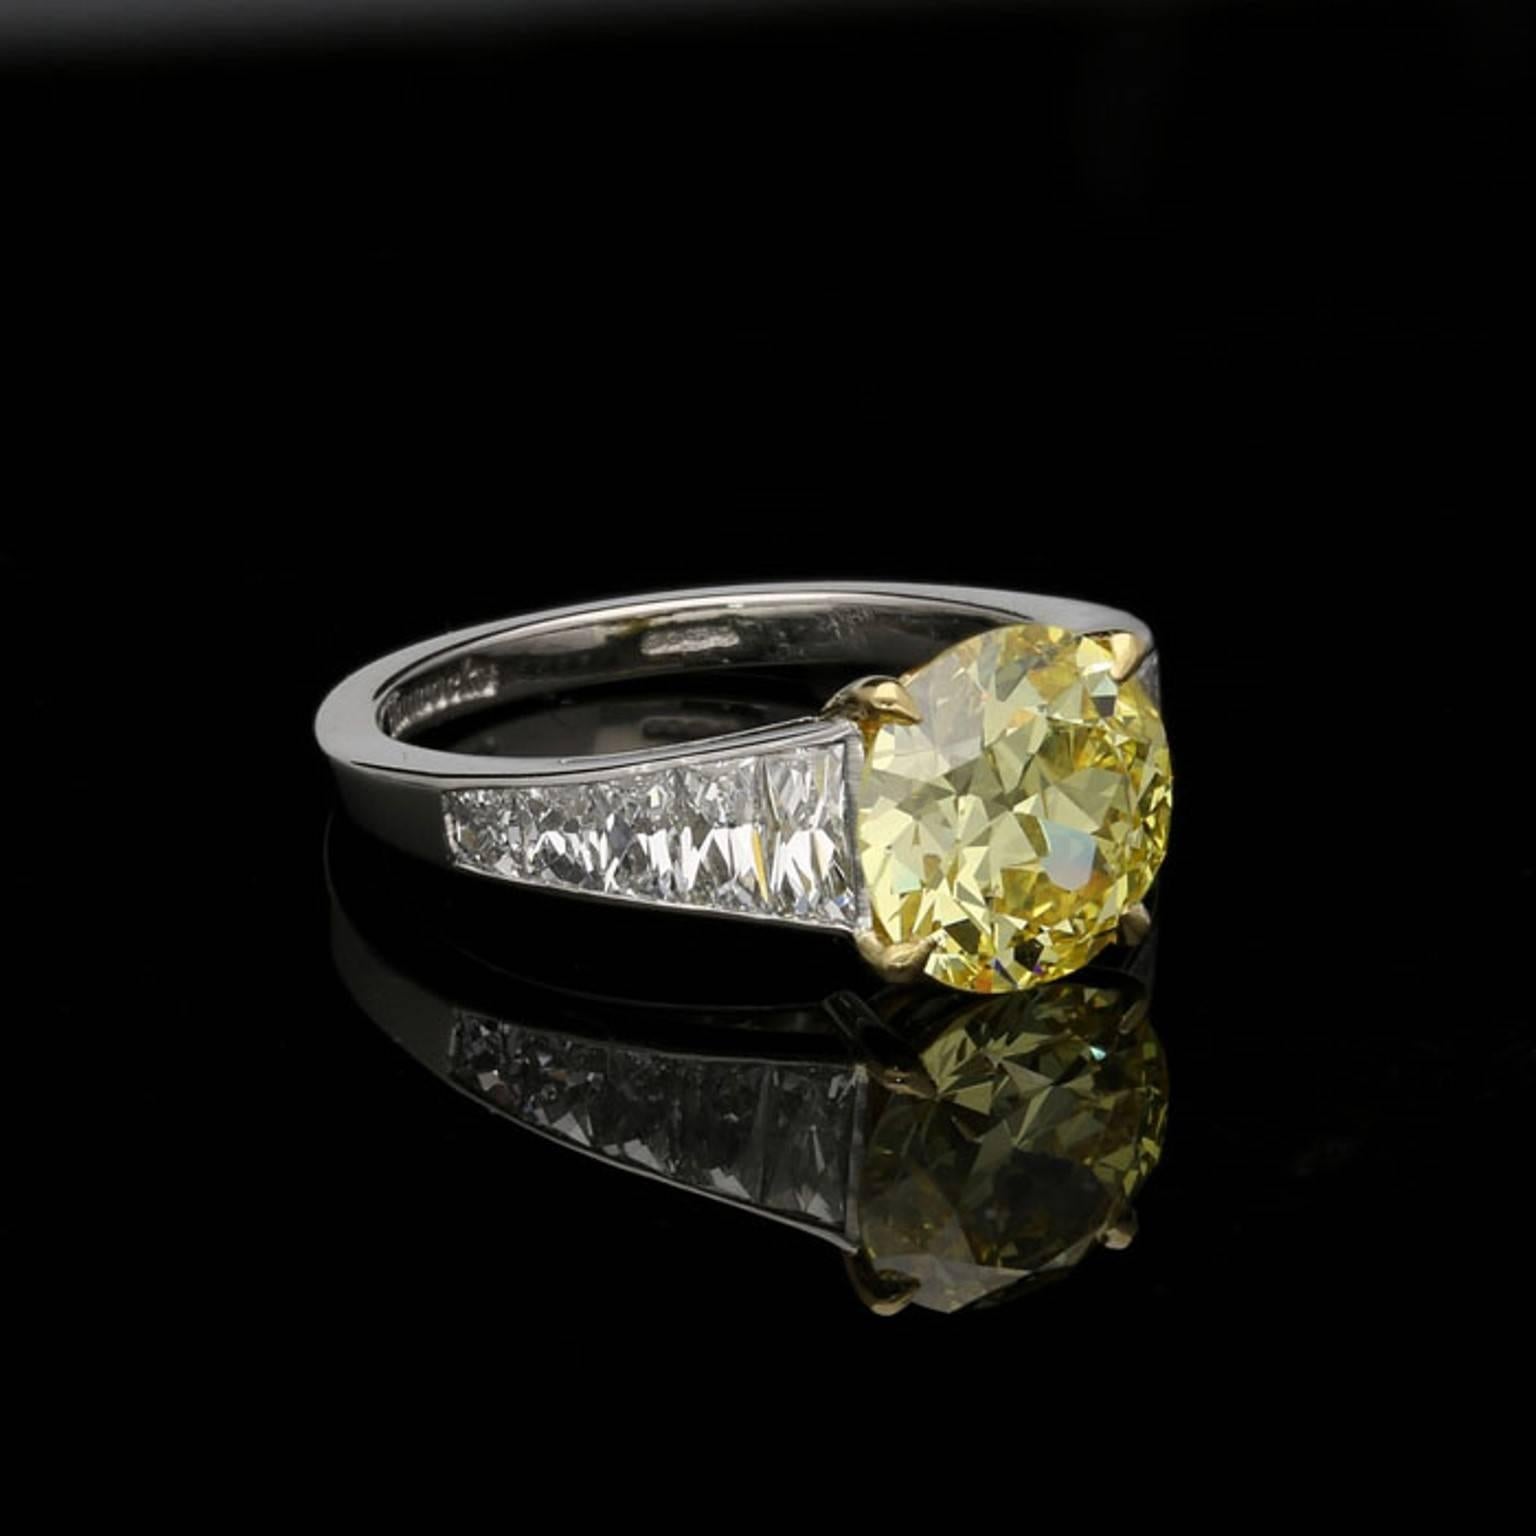 2.41 carat Natural Fancy Intense Yellow VS1 old European cut diamond with GIA certificate 
1.01 carats total of D VS tapering French cut diamonds
0.08 carats of single cut yellow diamonds
Platinum and 18ct yellow gold with maker's signature and